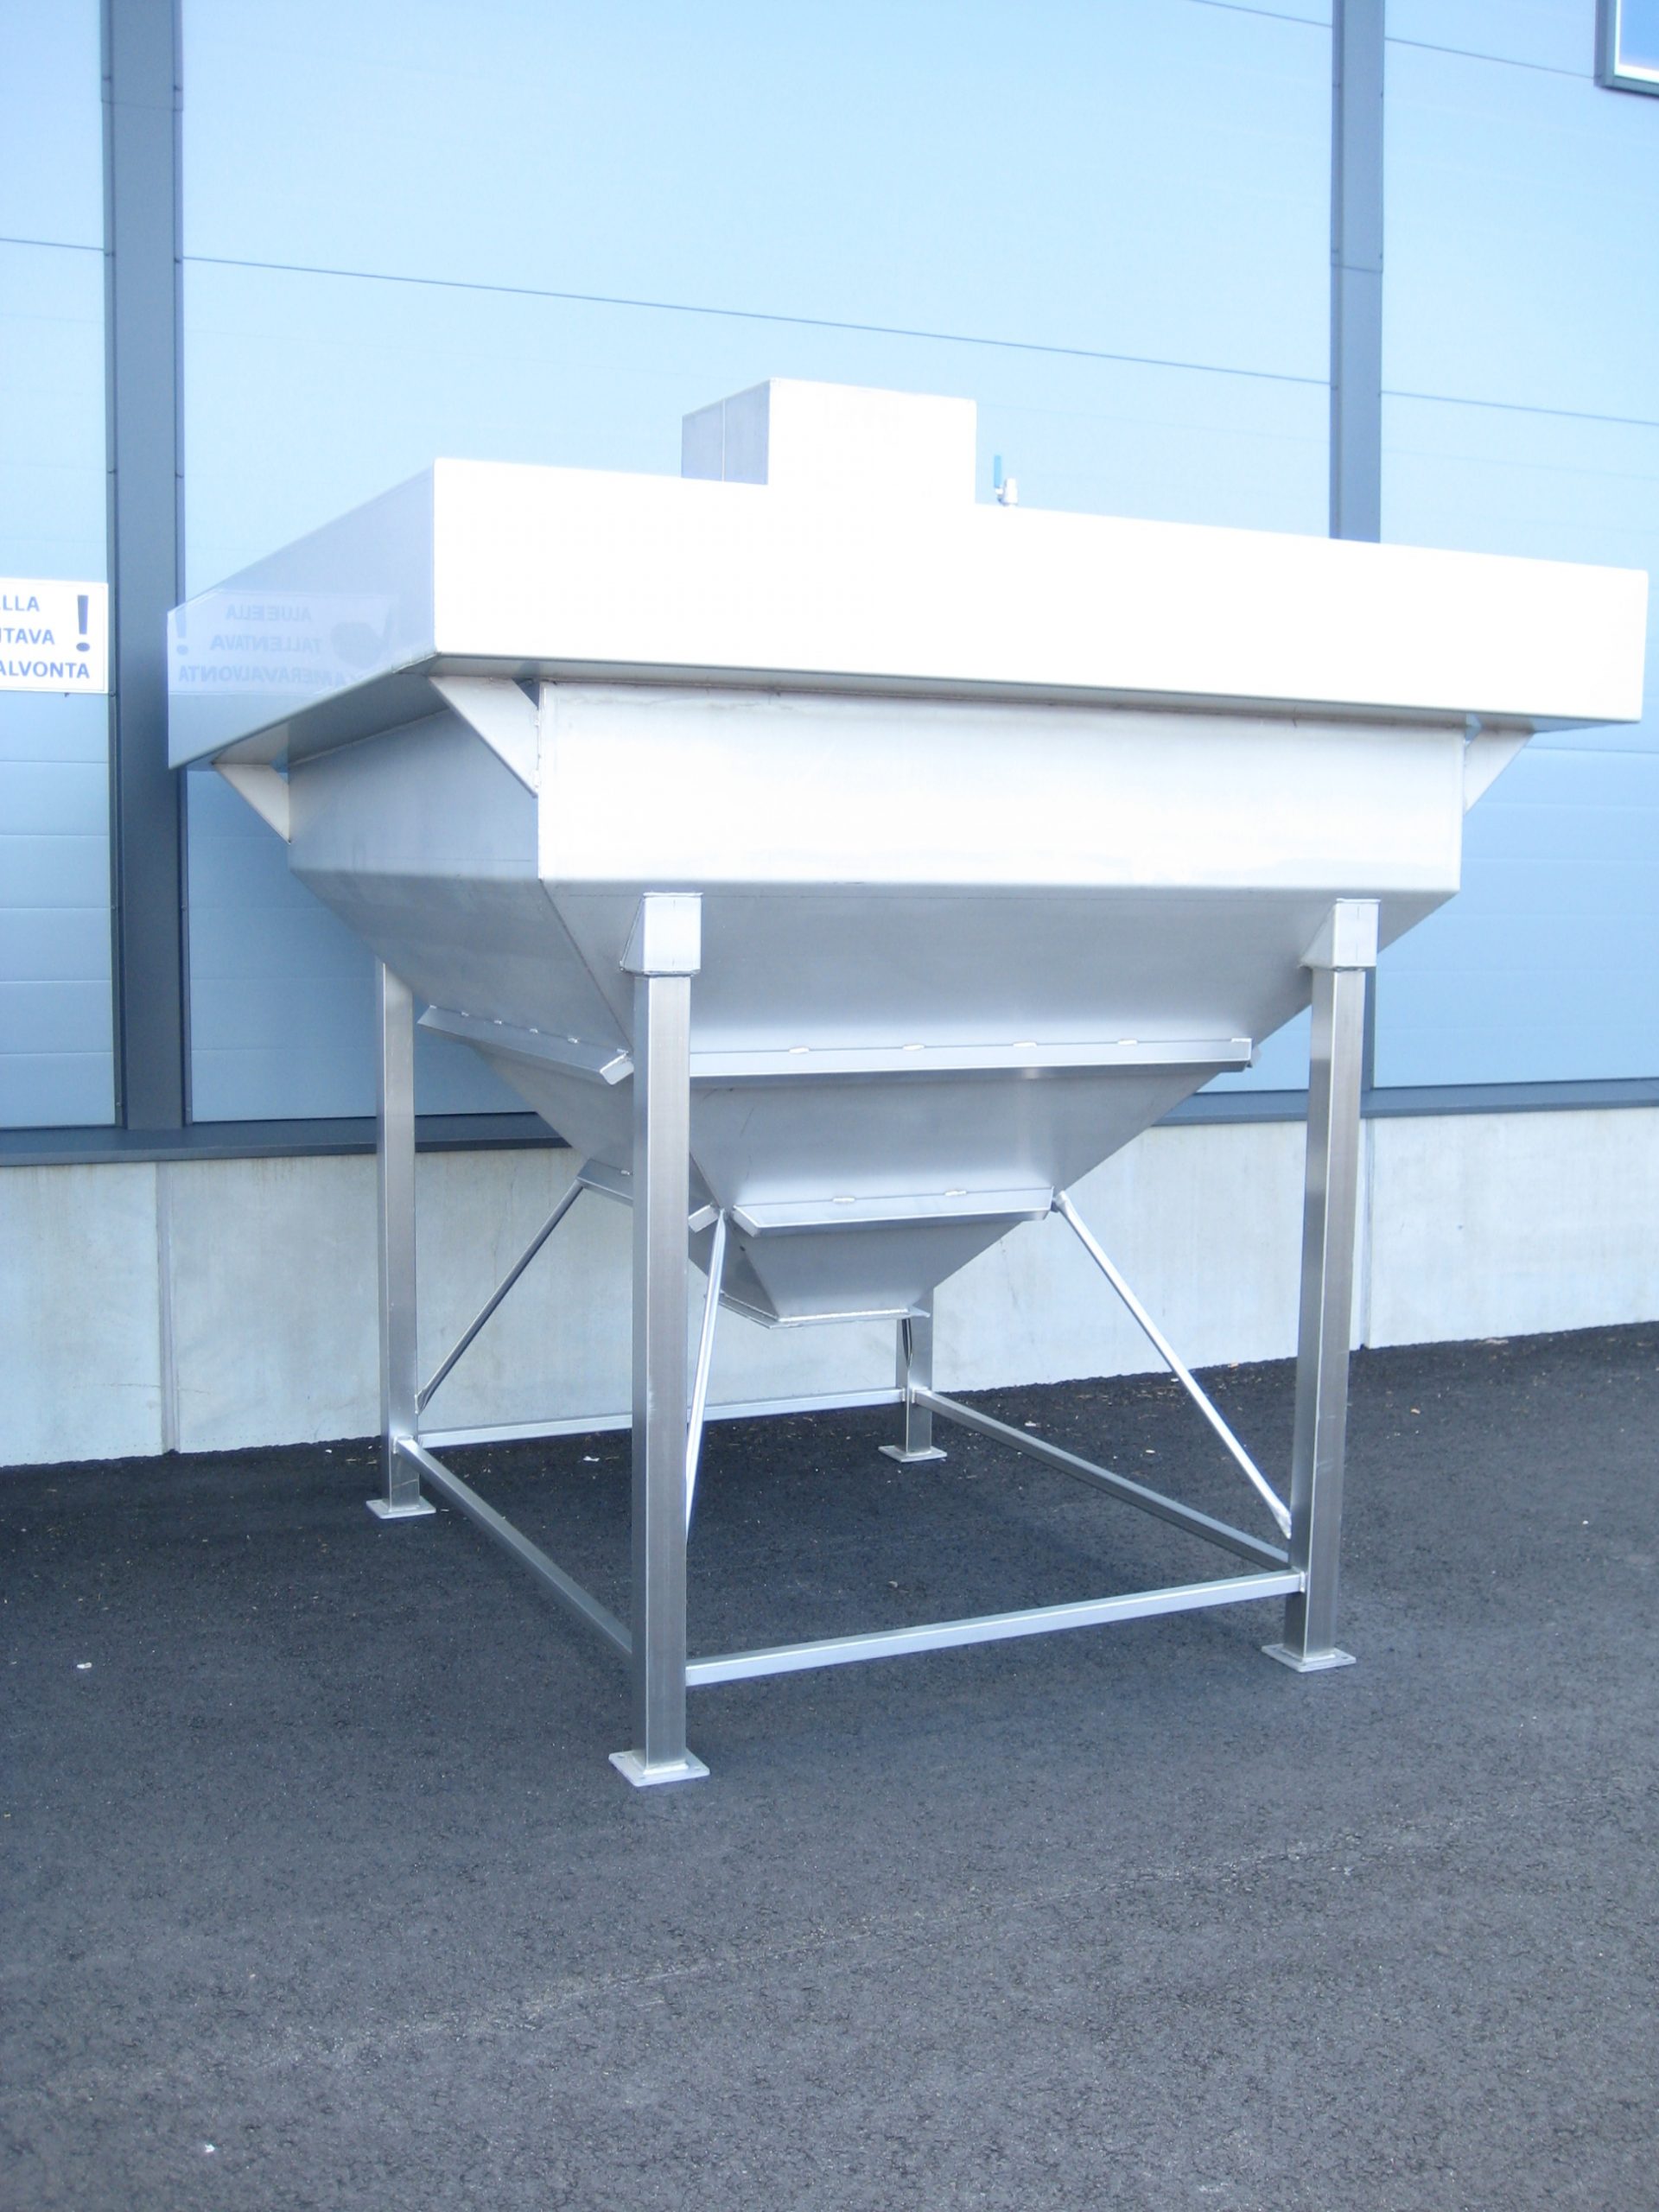 Product image: Steel sand separation units